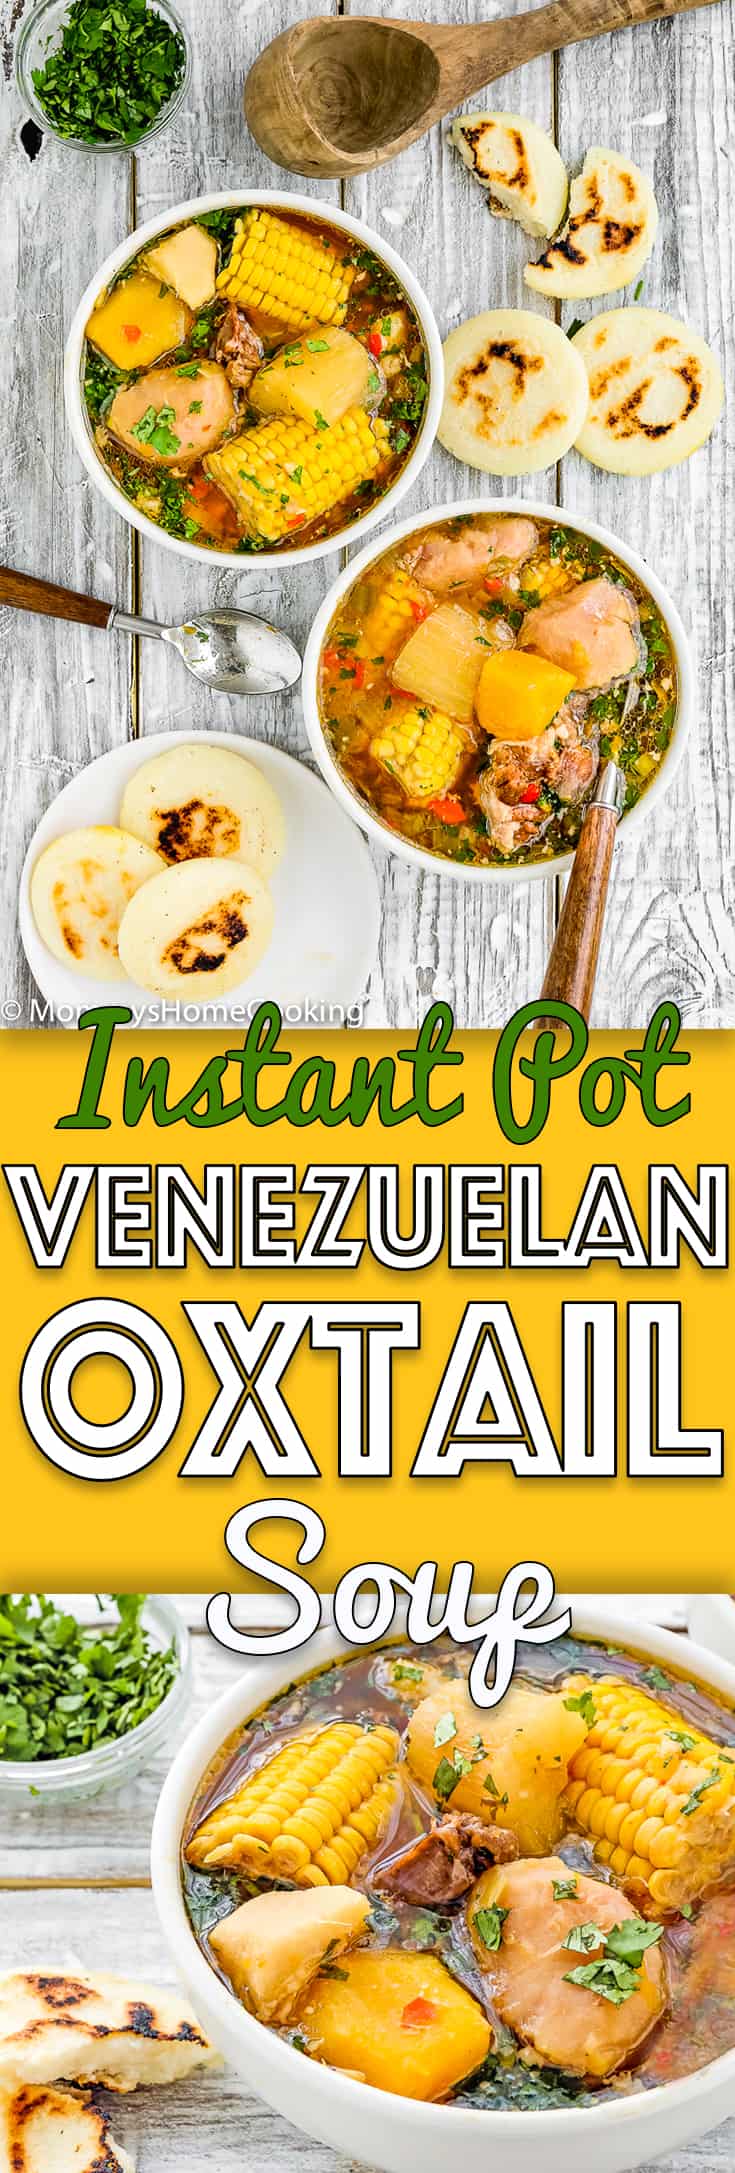 2 bowls with Venezuelan Oxtail Soup and arepas with descriptive text 